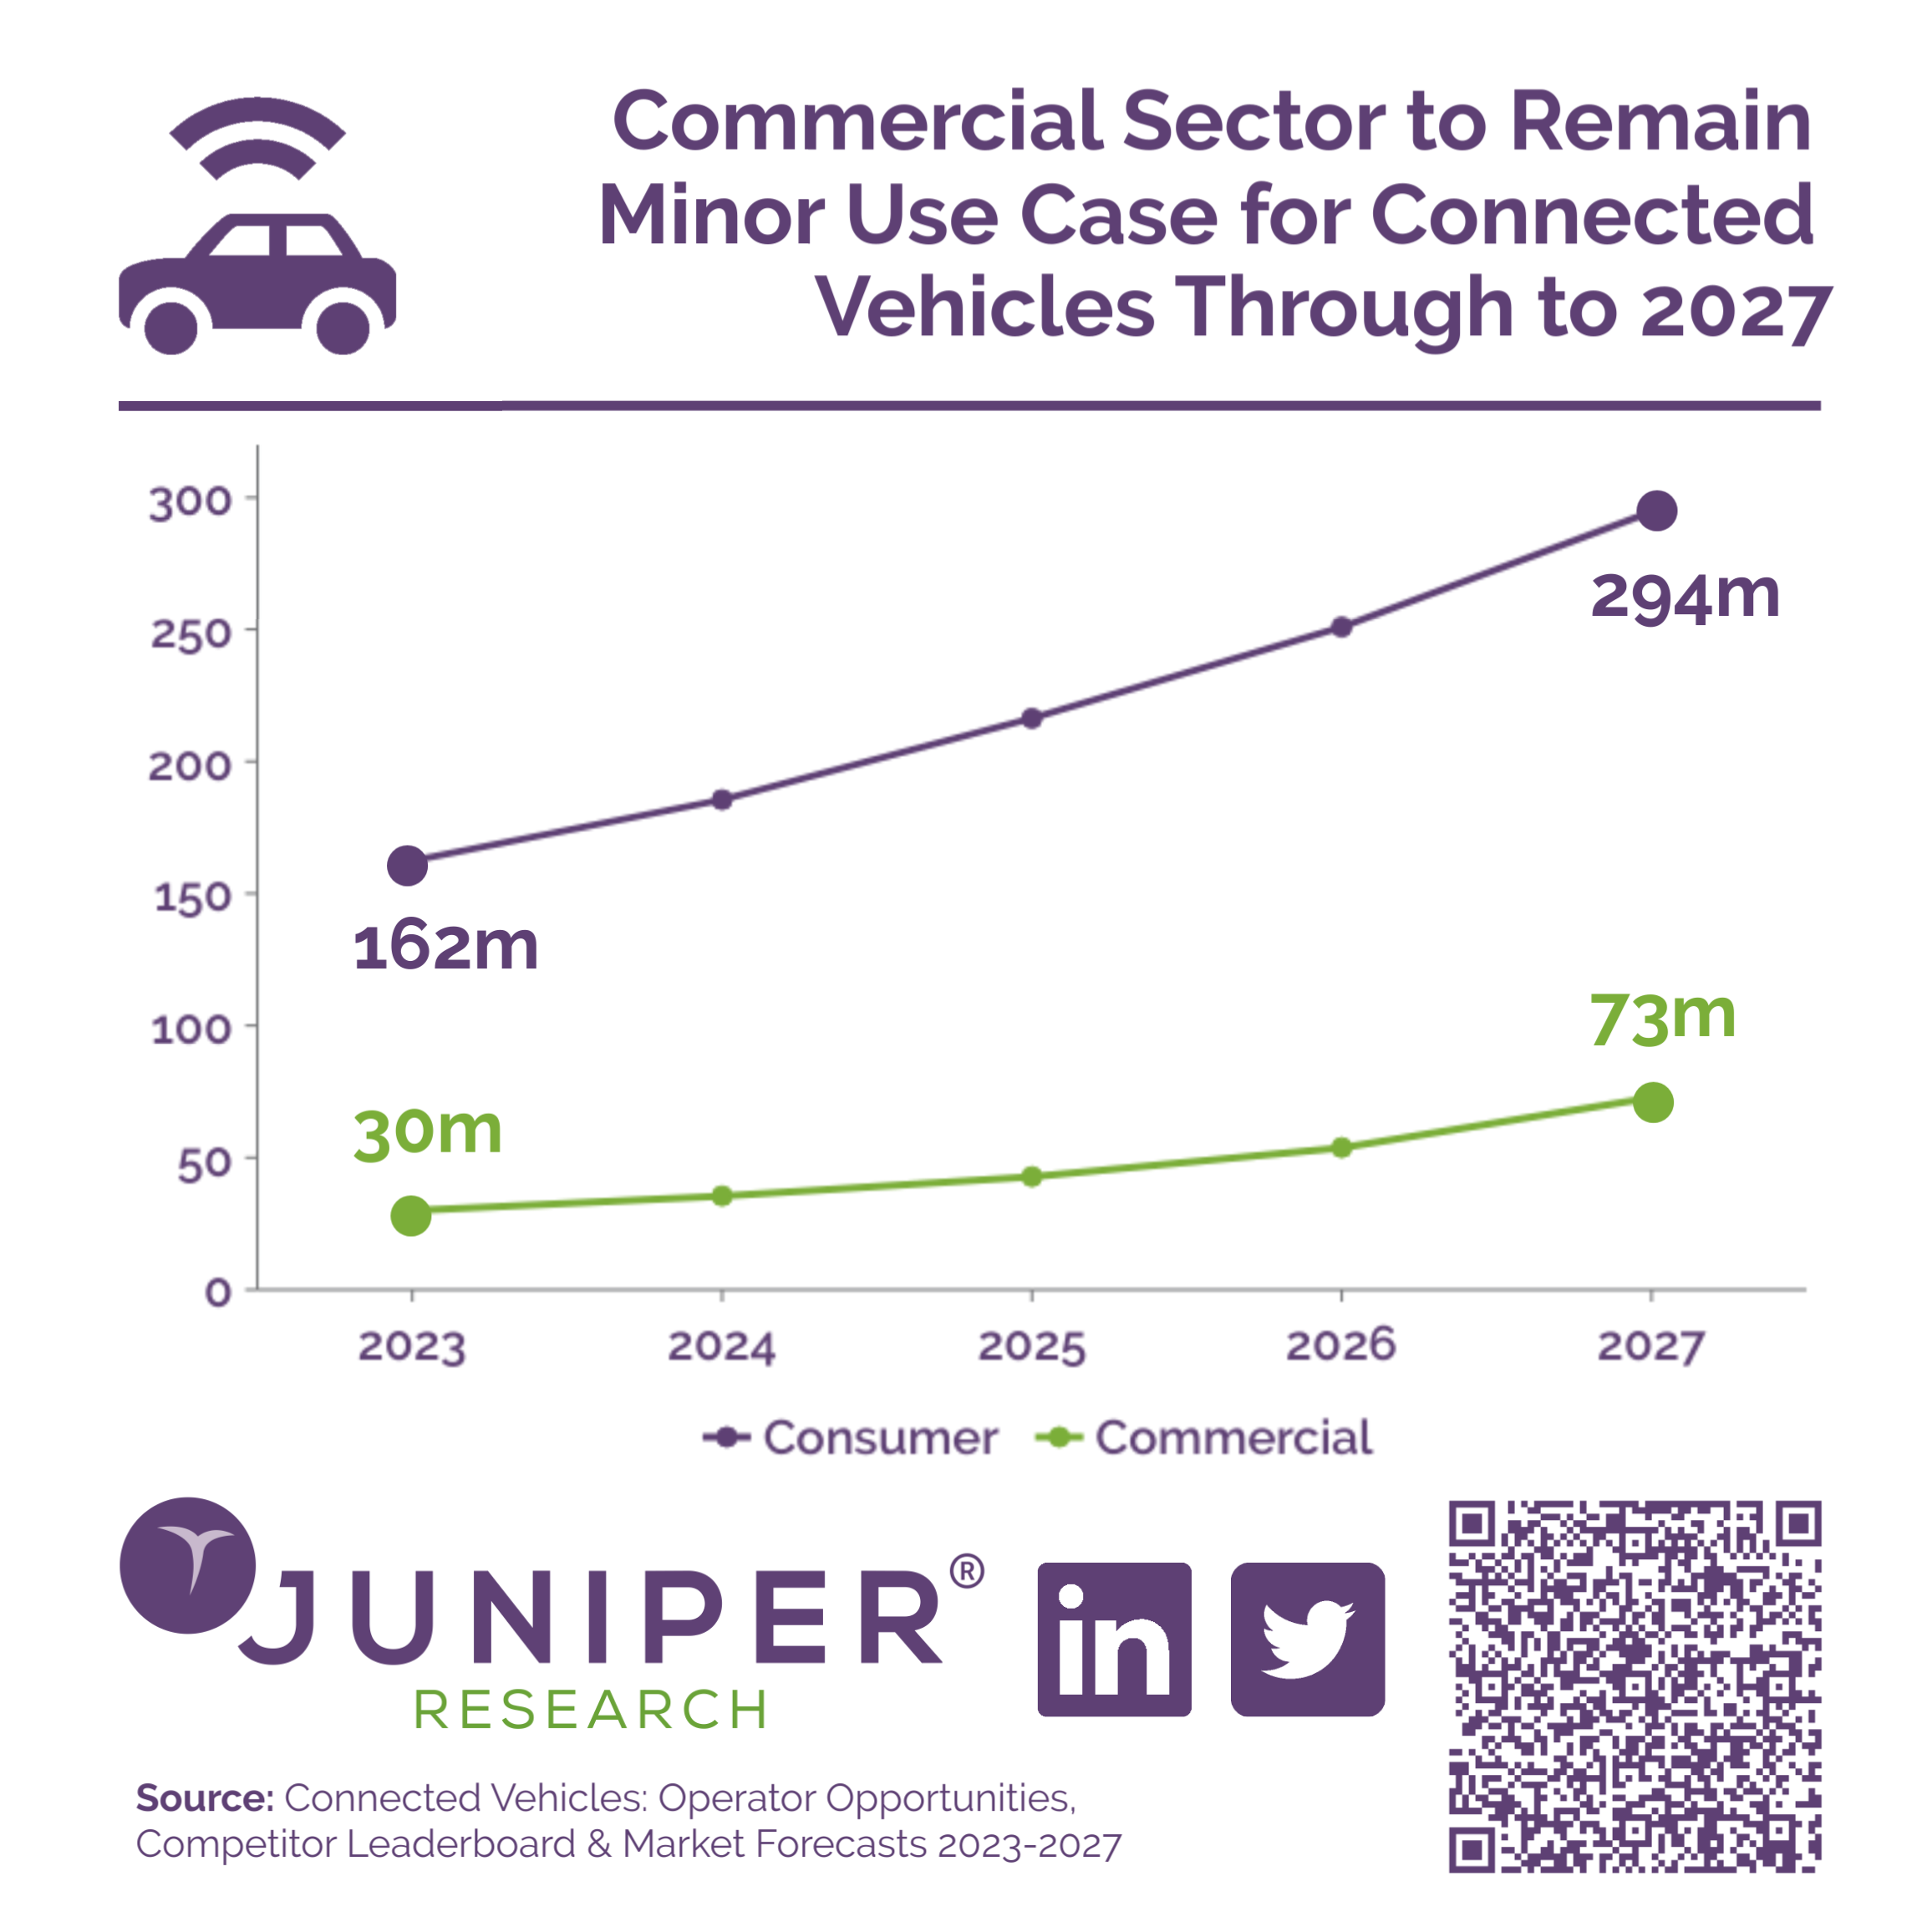 Connected Vehicles in service - Consumer, Commercial - 2023-2027